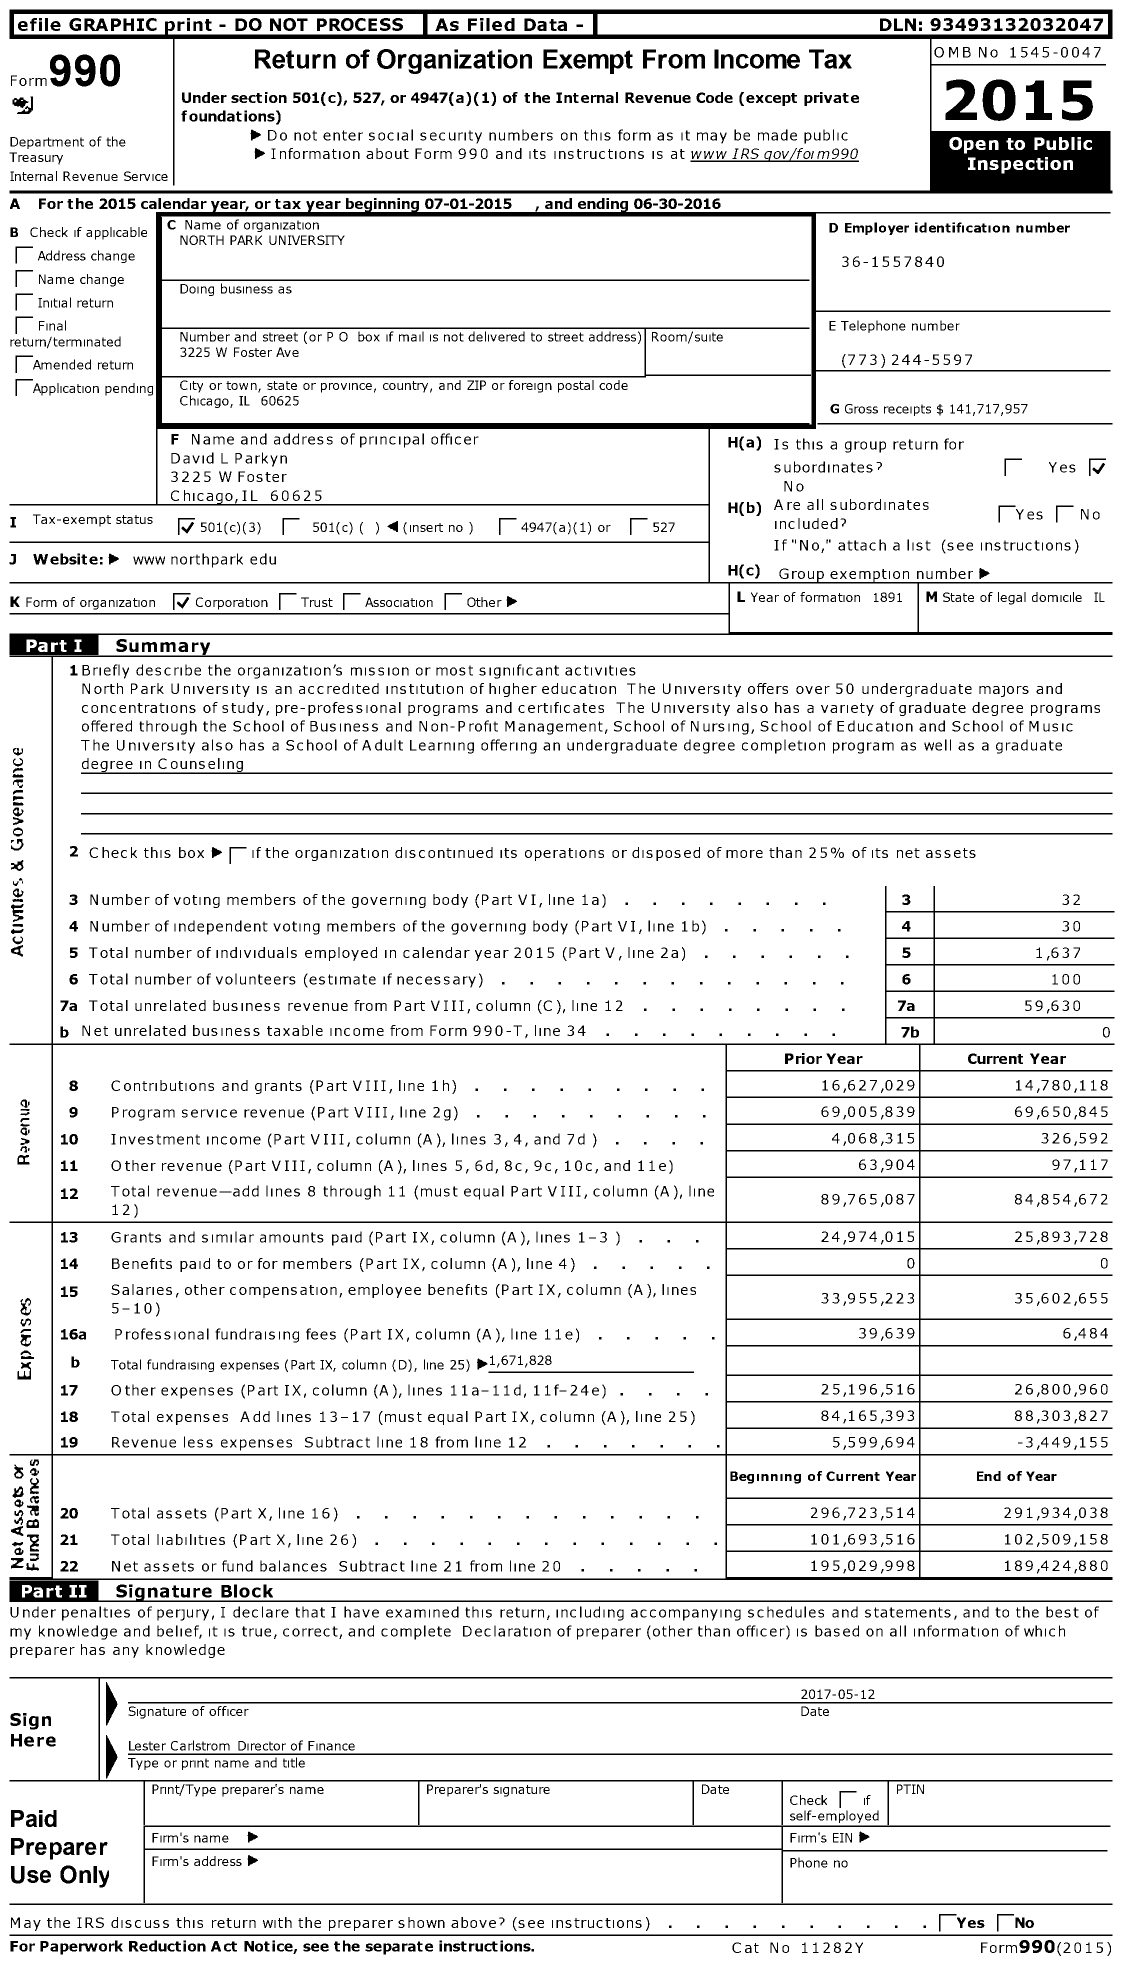 Image of first page of 2015 Form 990 for North Park University (NPU)